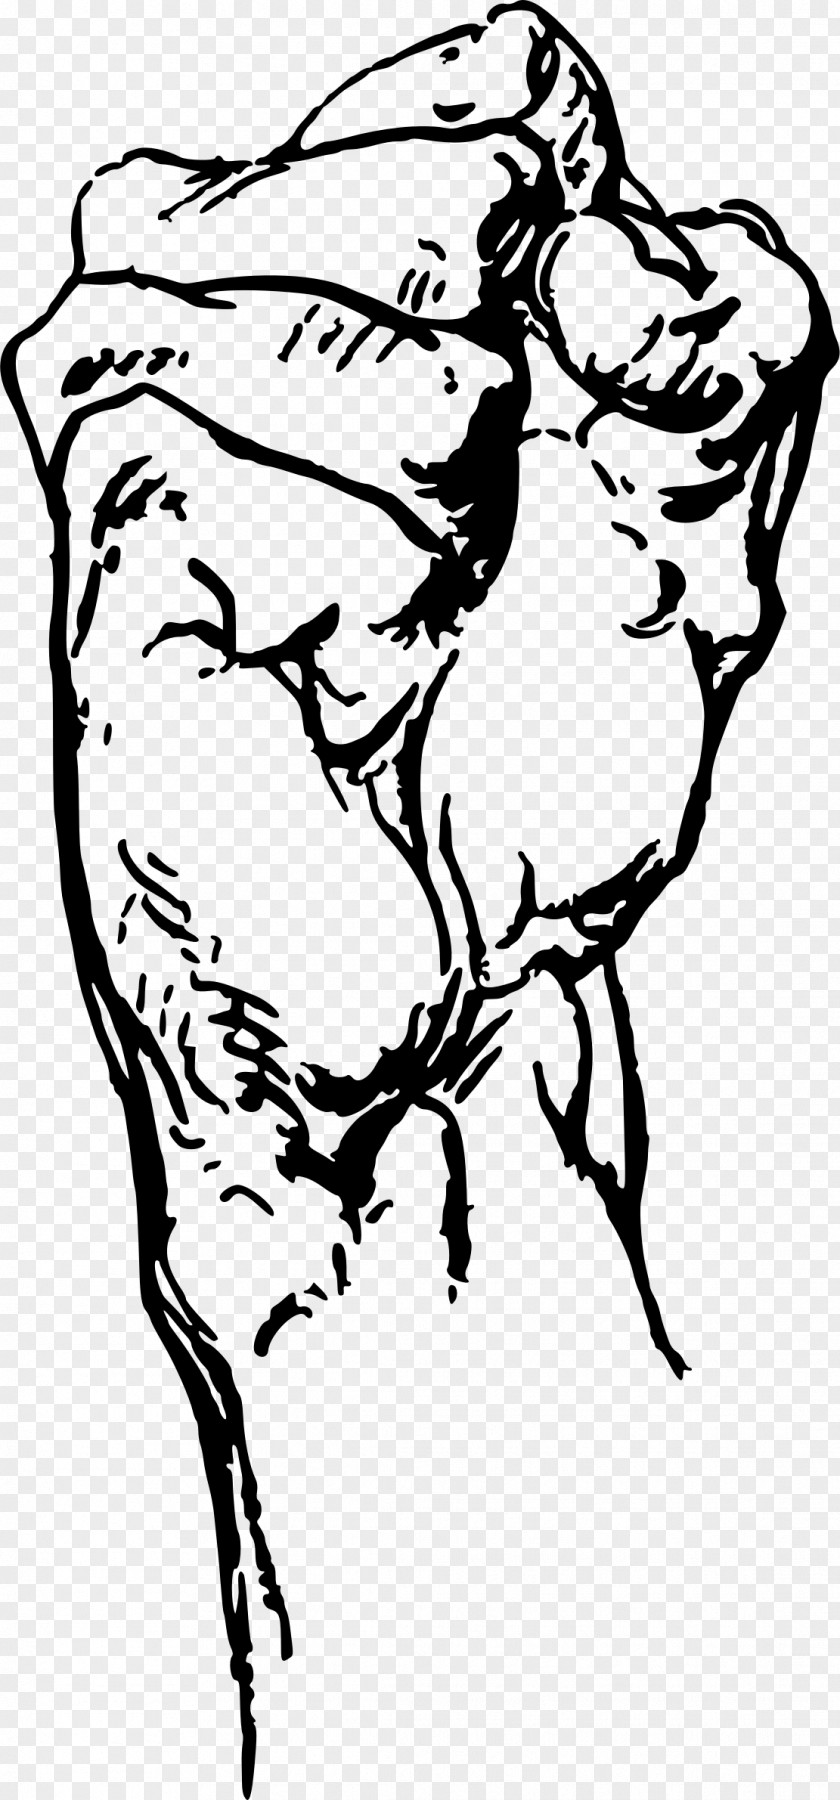 Clenched Fist Constructive Anatomy Drawing Human Art PNG